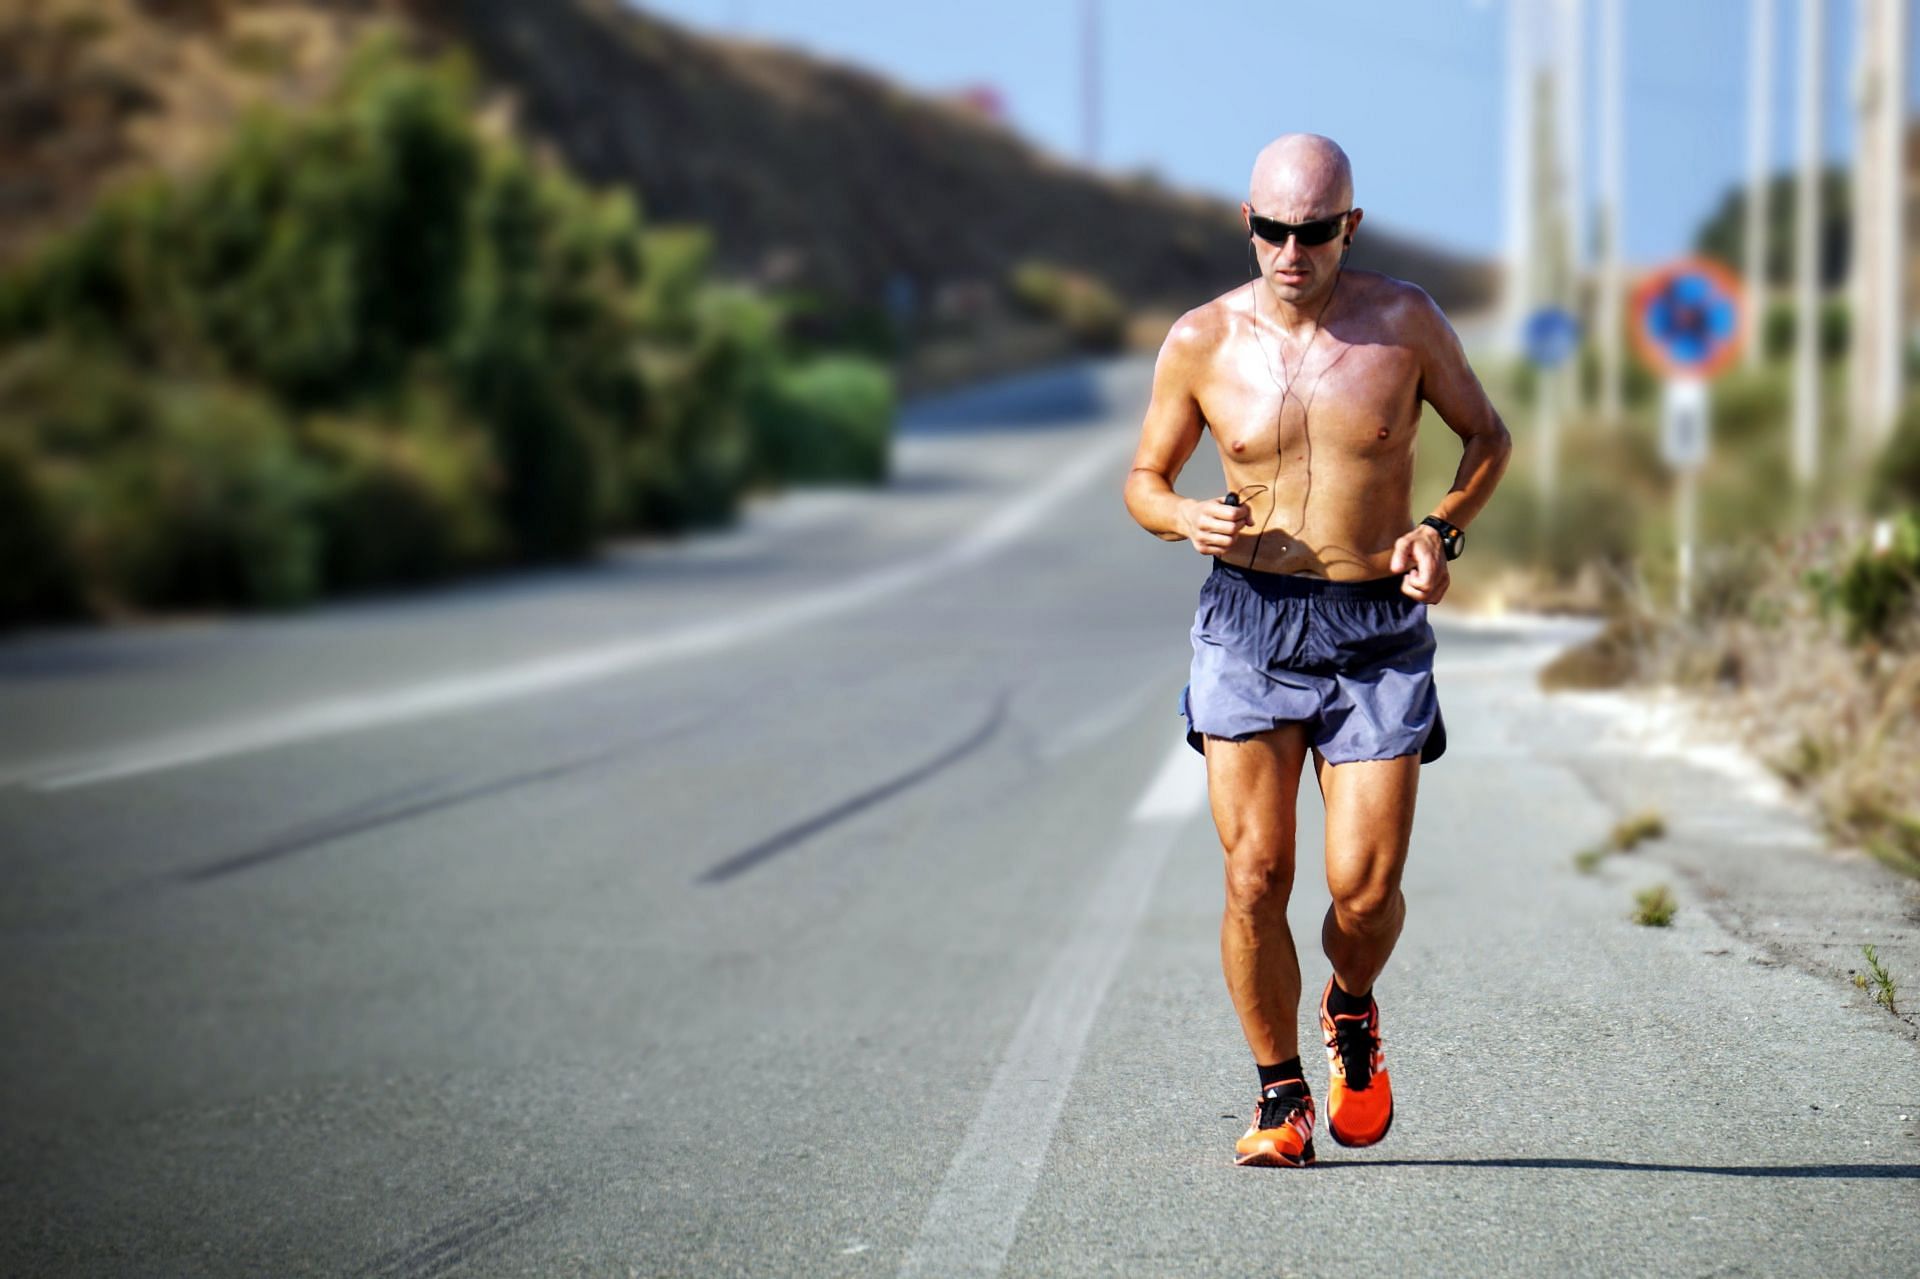 Disadvantages of using carbon-plated running shoes (image sourced via Pexels / Photo by Maarten)